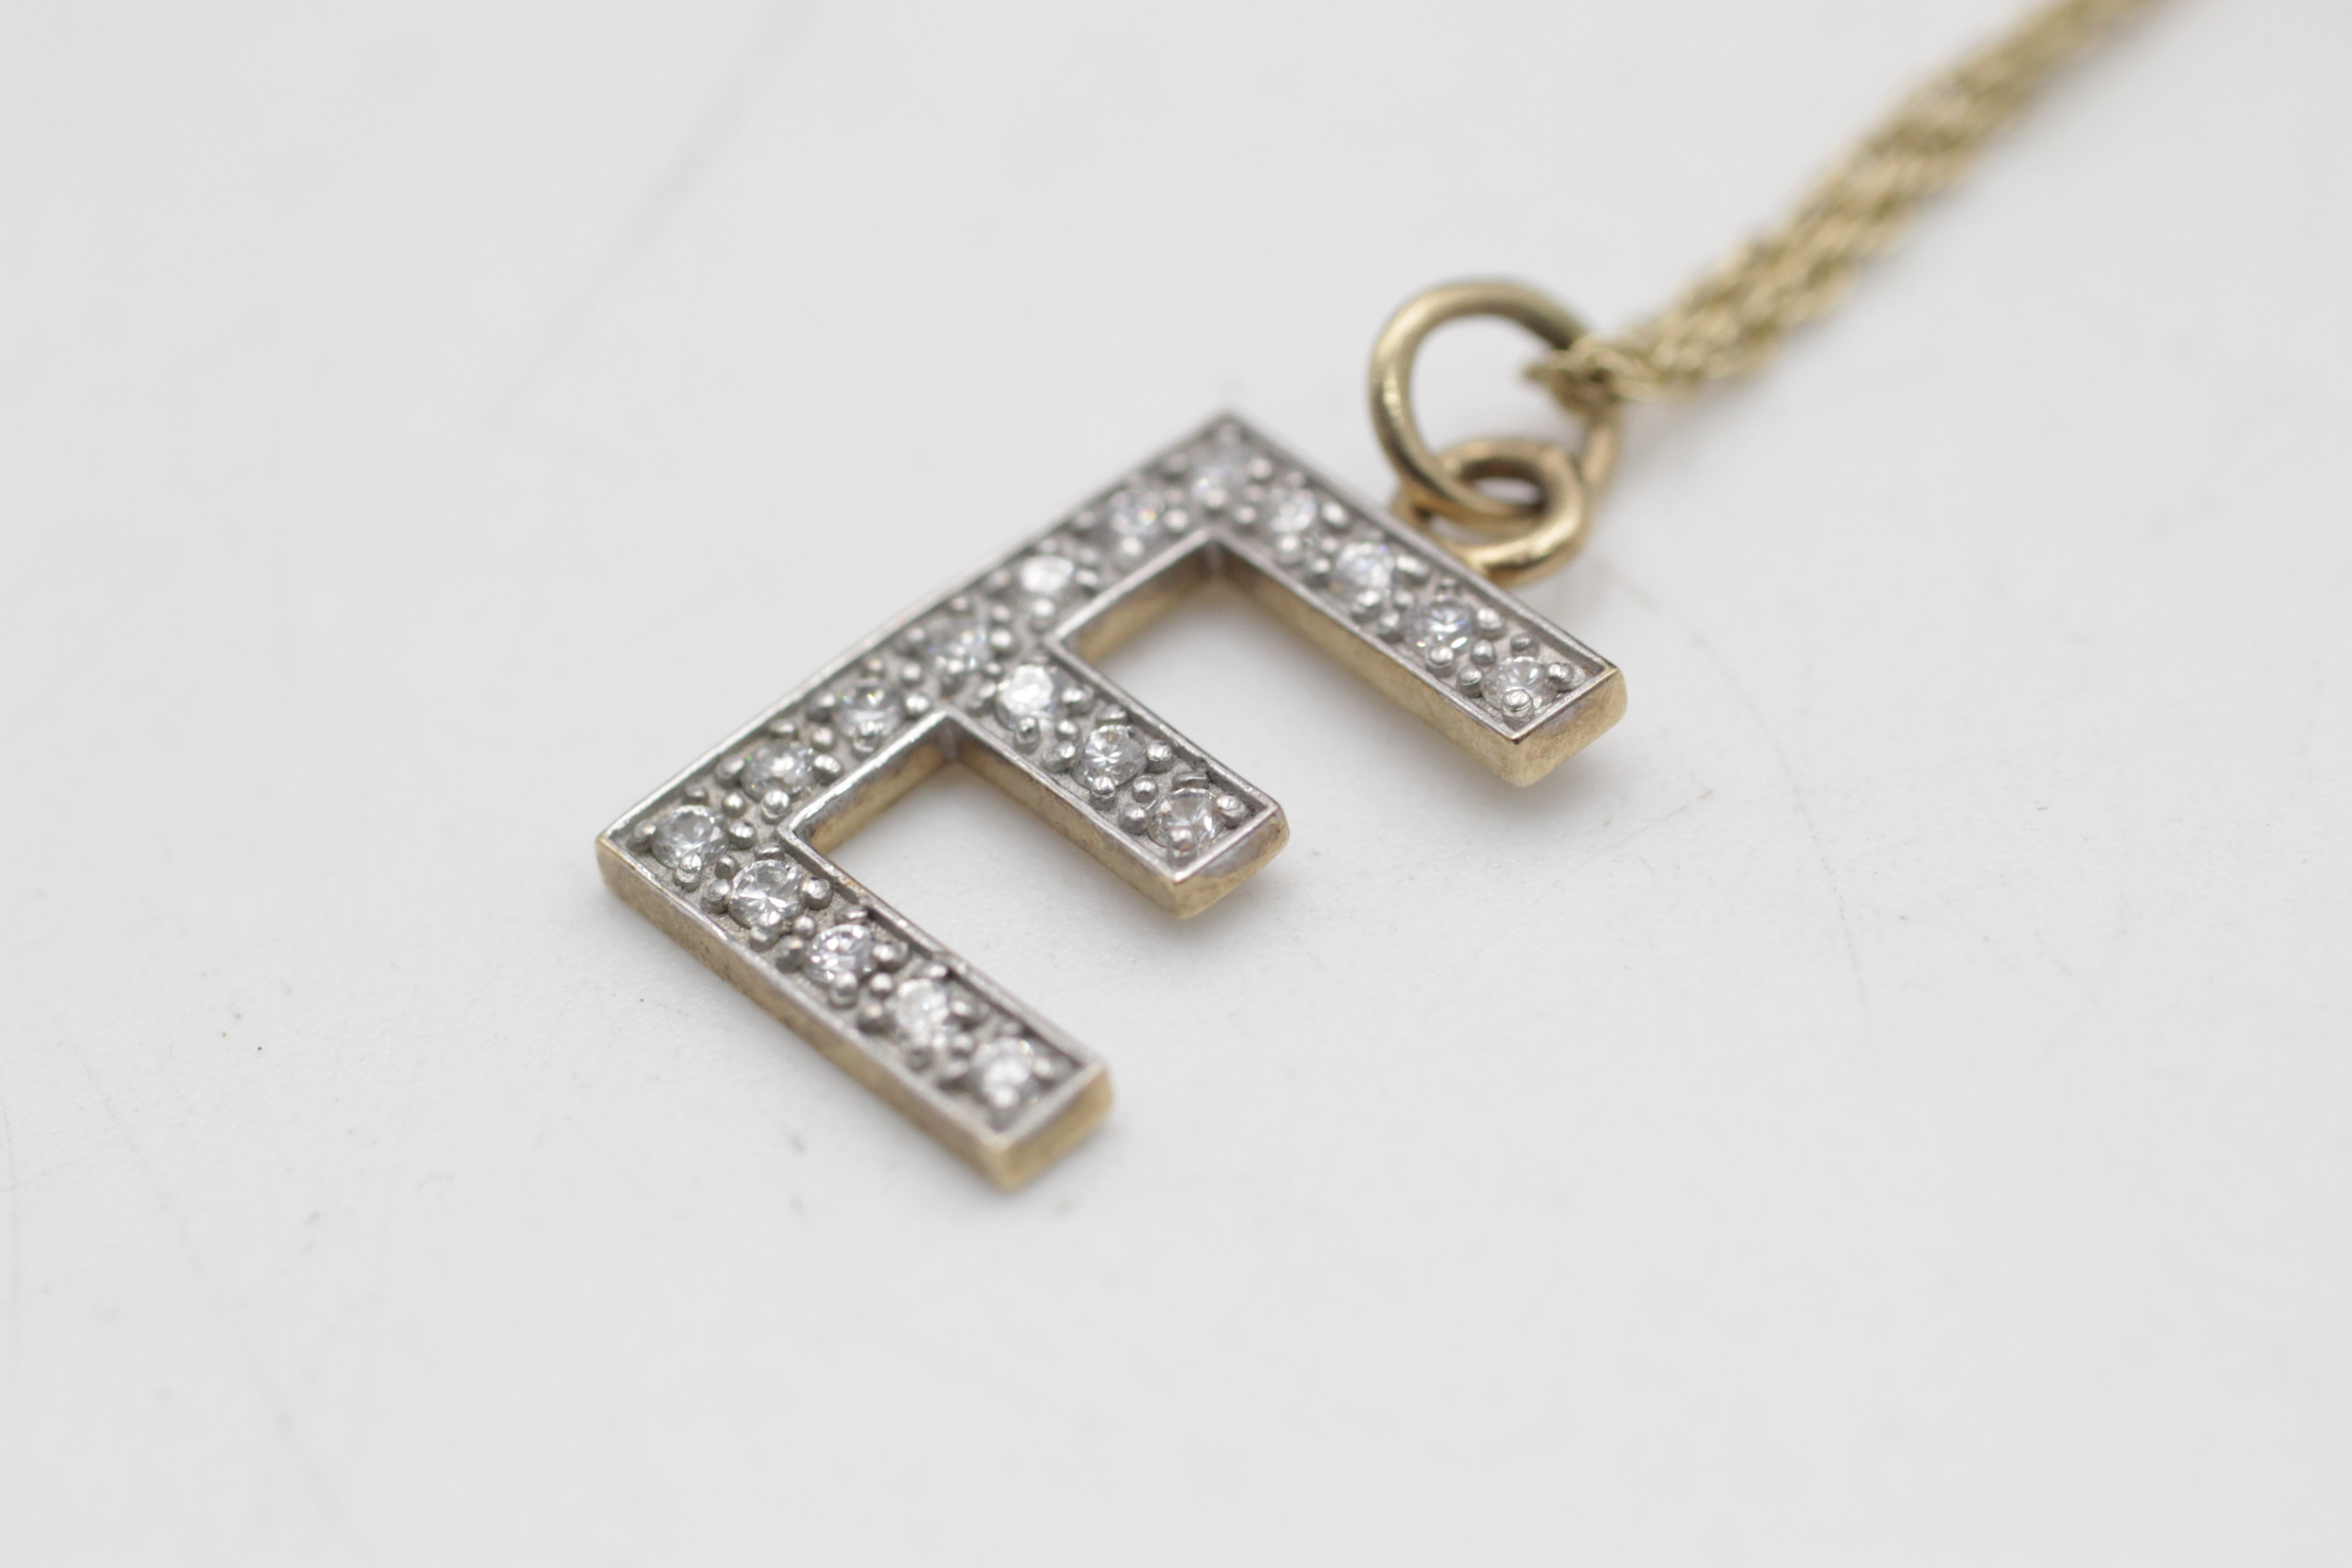 9ct gold vintage clear gemstone set "E" initial letter pendant necklace (2.7g) - Image 3 of 6